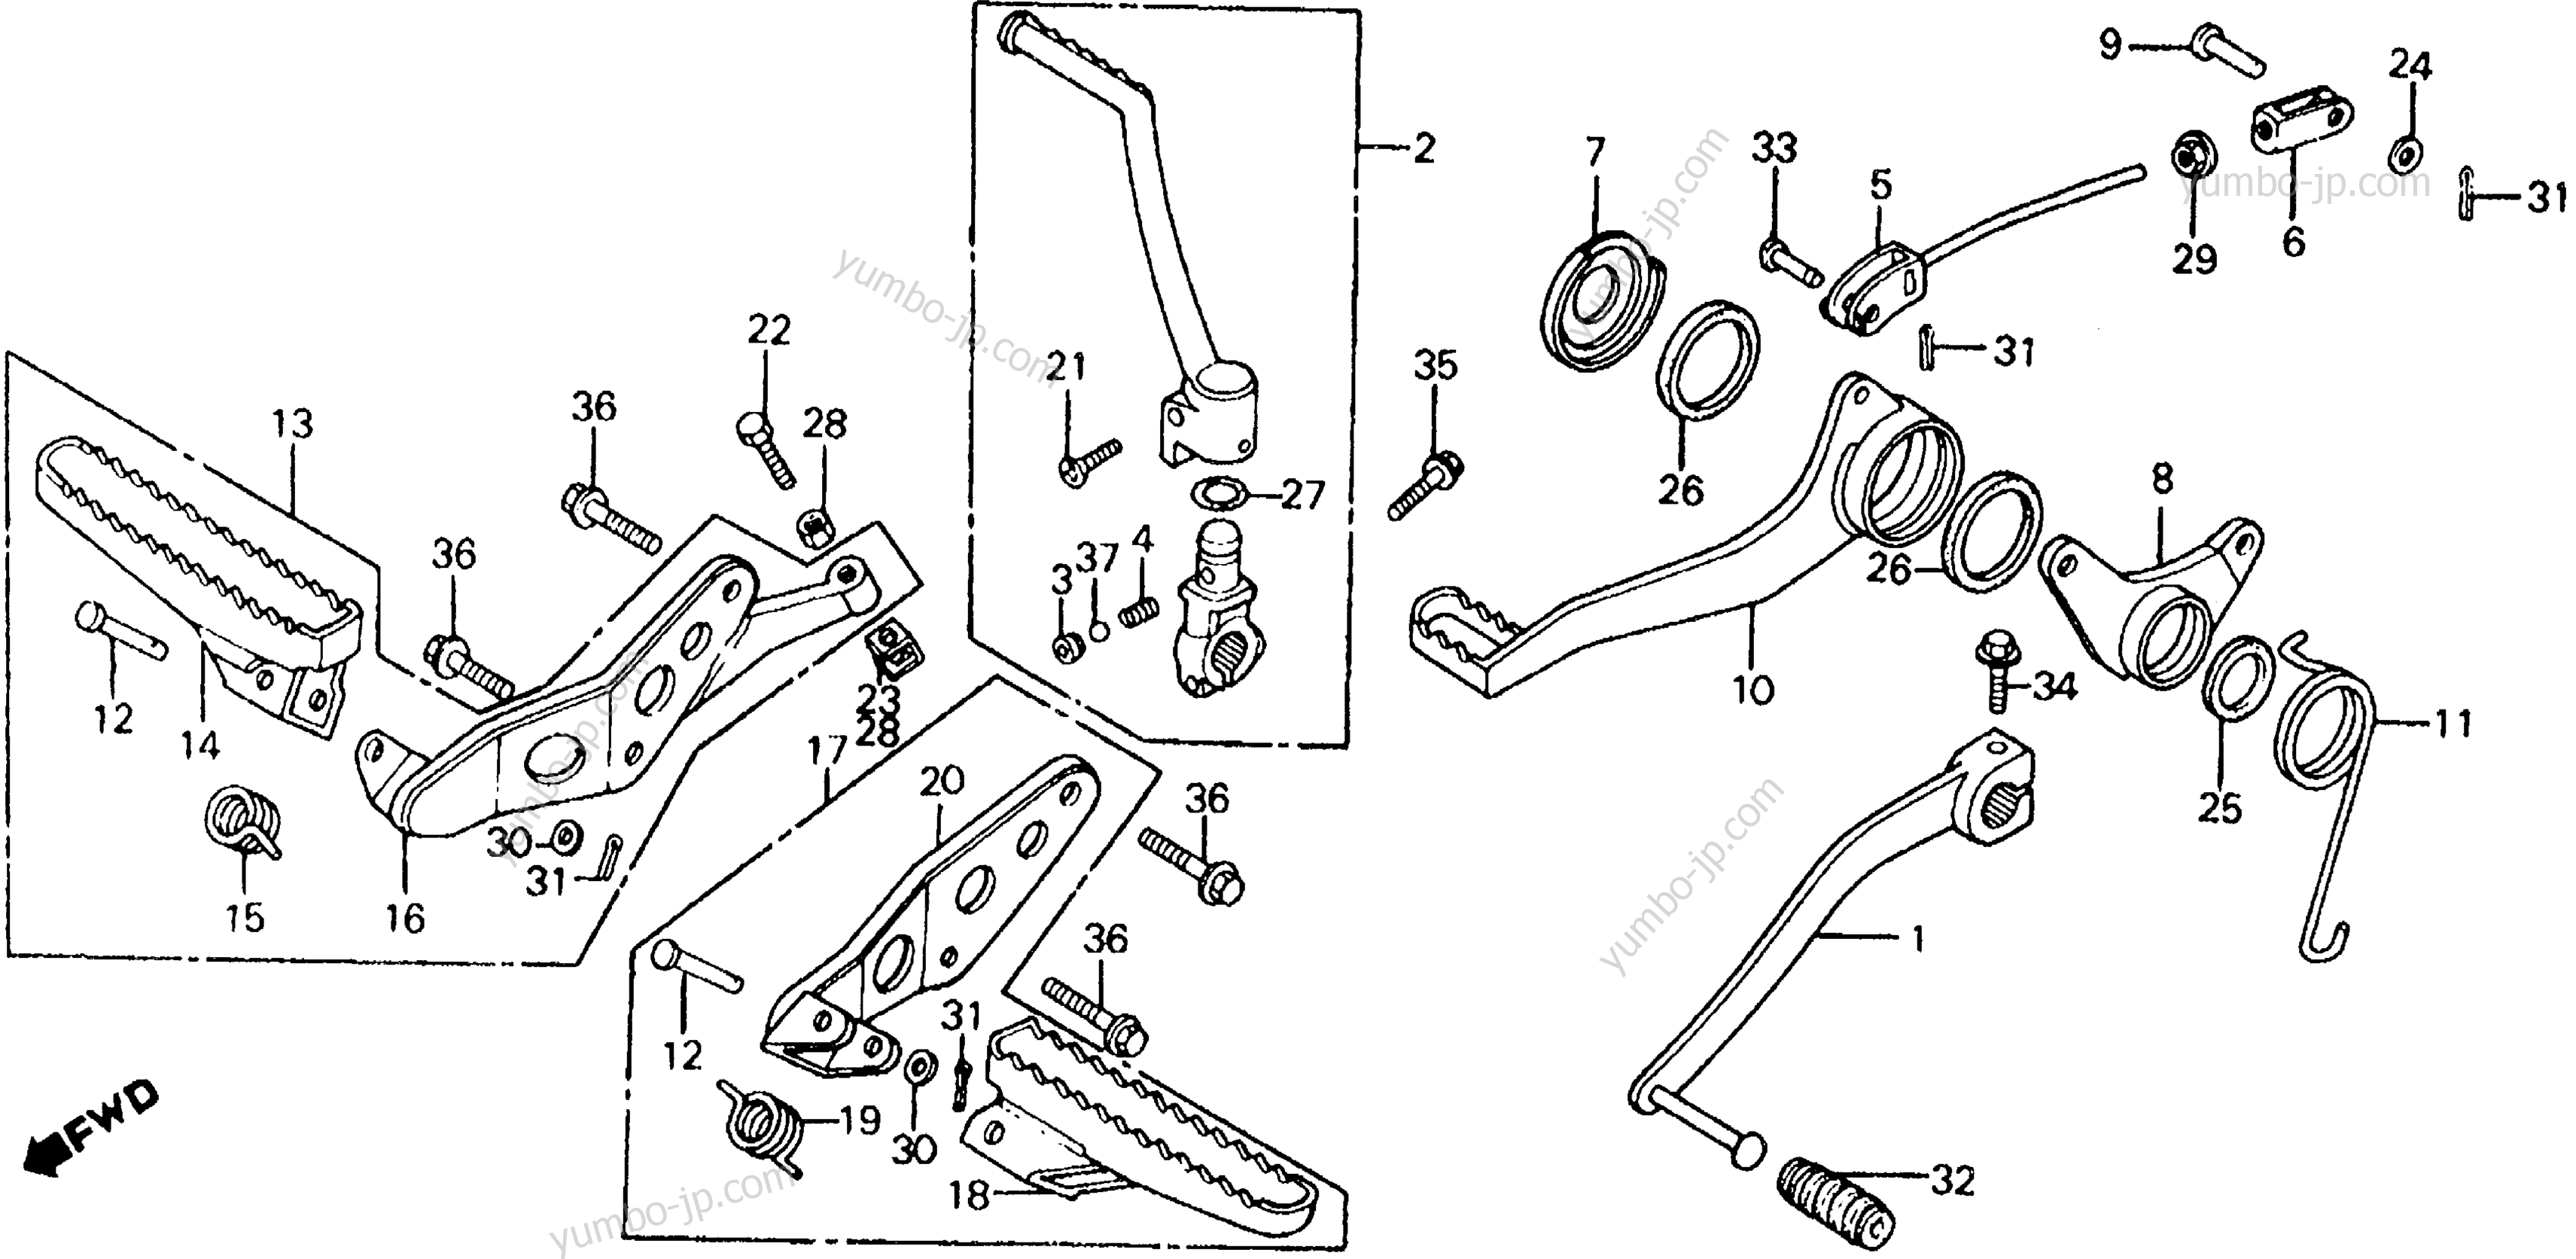 FOOTPEGS / BRAKE PEDAL / GEARSHIFT PEDAL for ATVs HONDA ATC200X A 1984 year